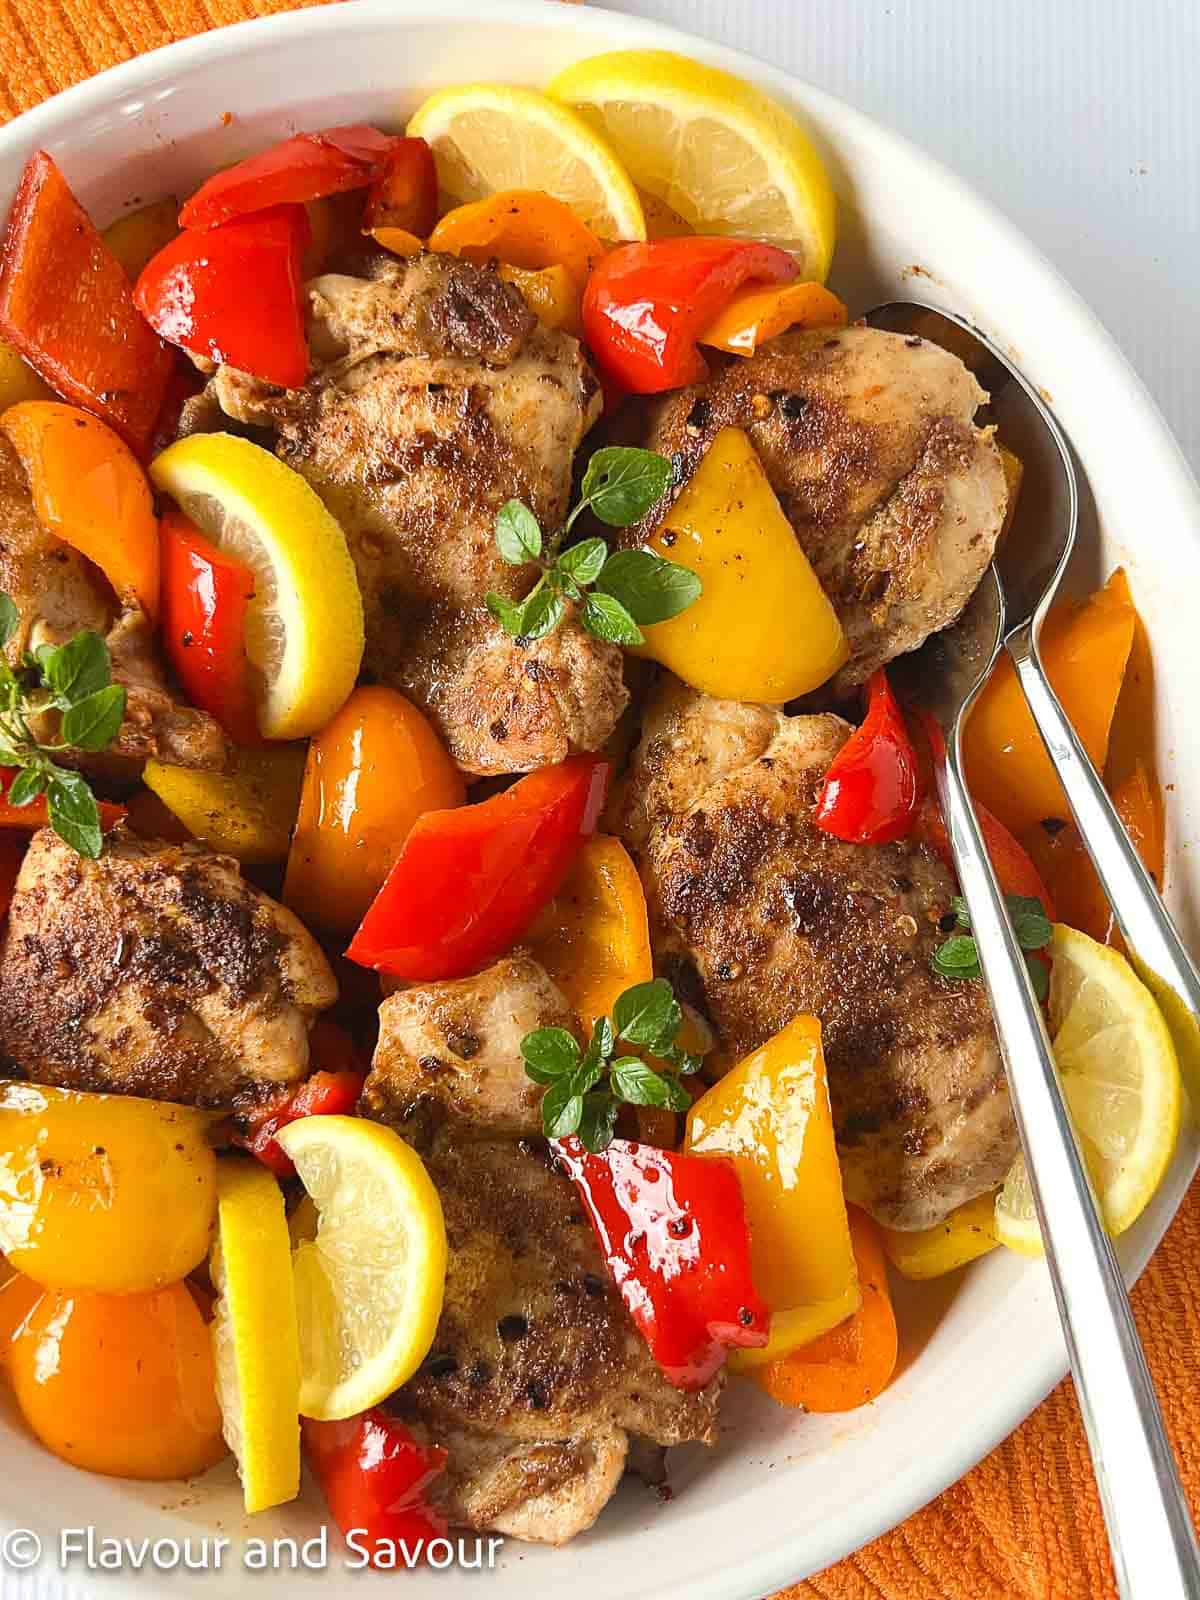 A round shallow dish with chicken thighs, colored bell peppers and lemon slices.